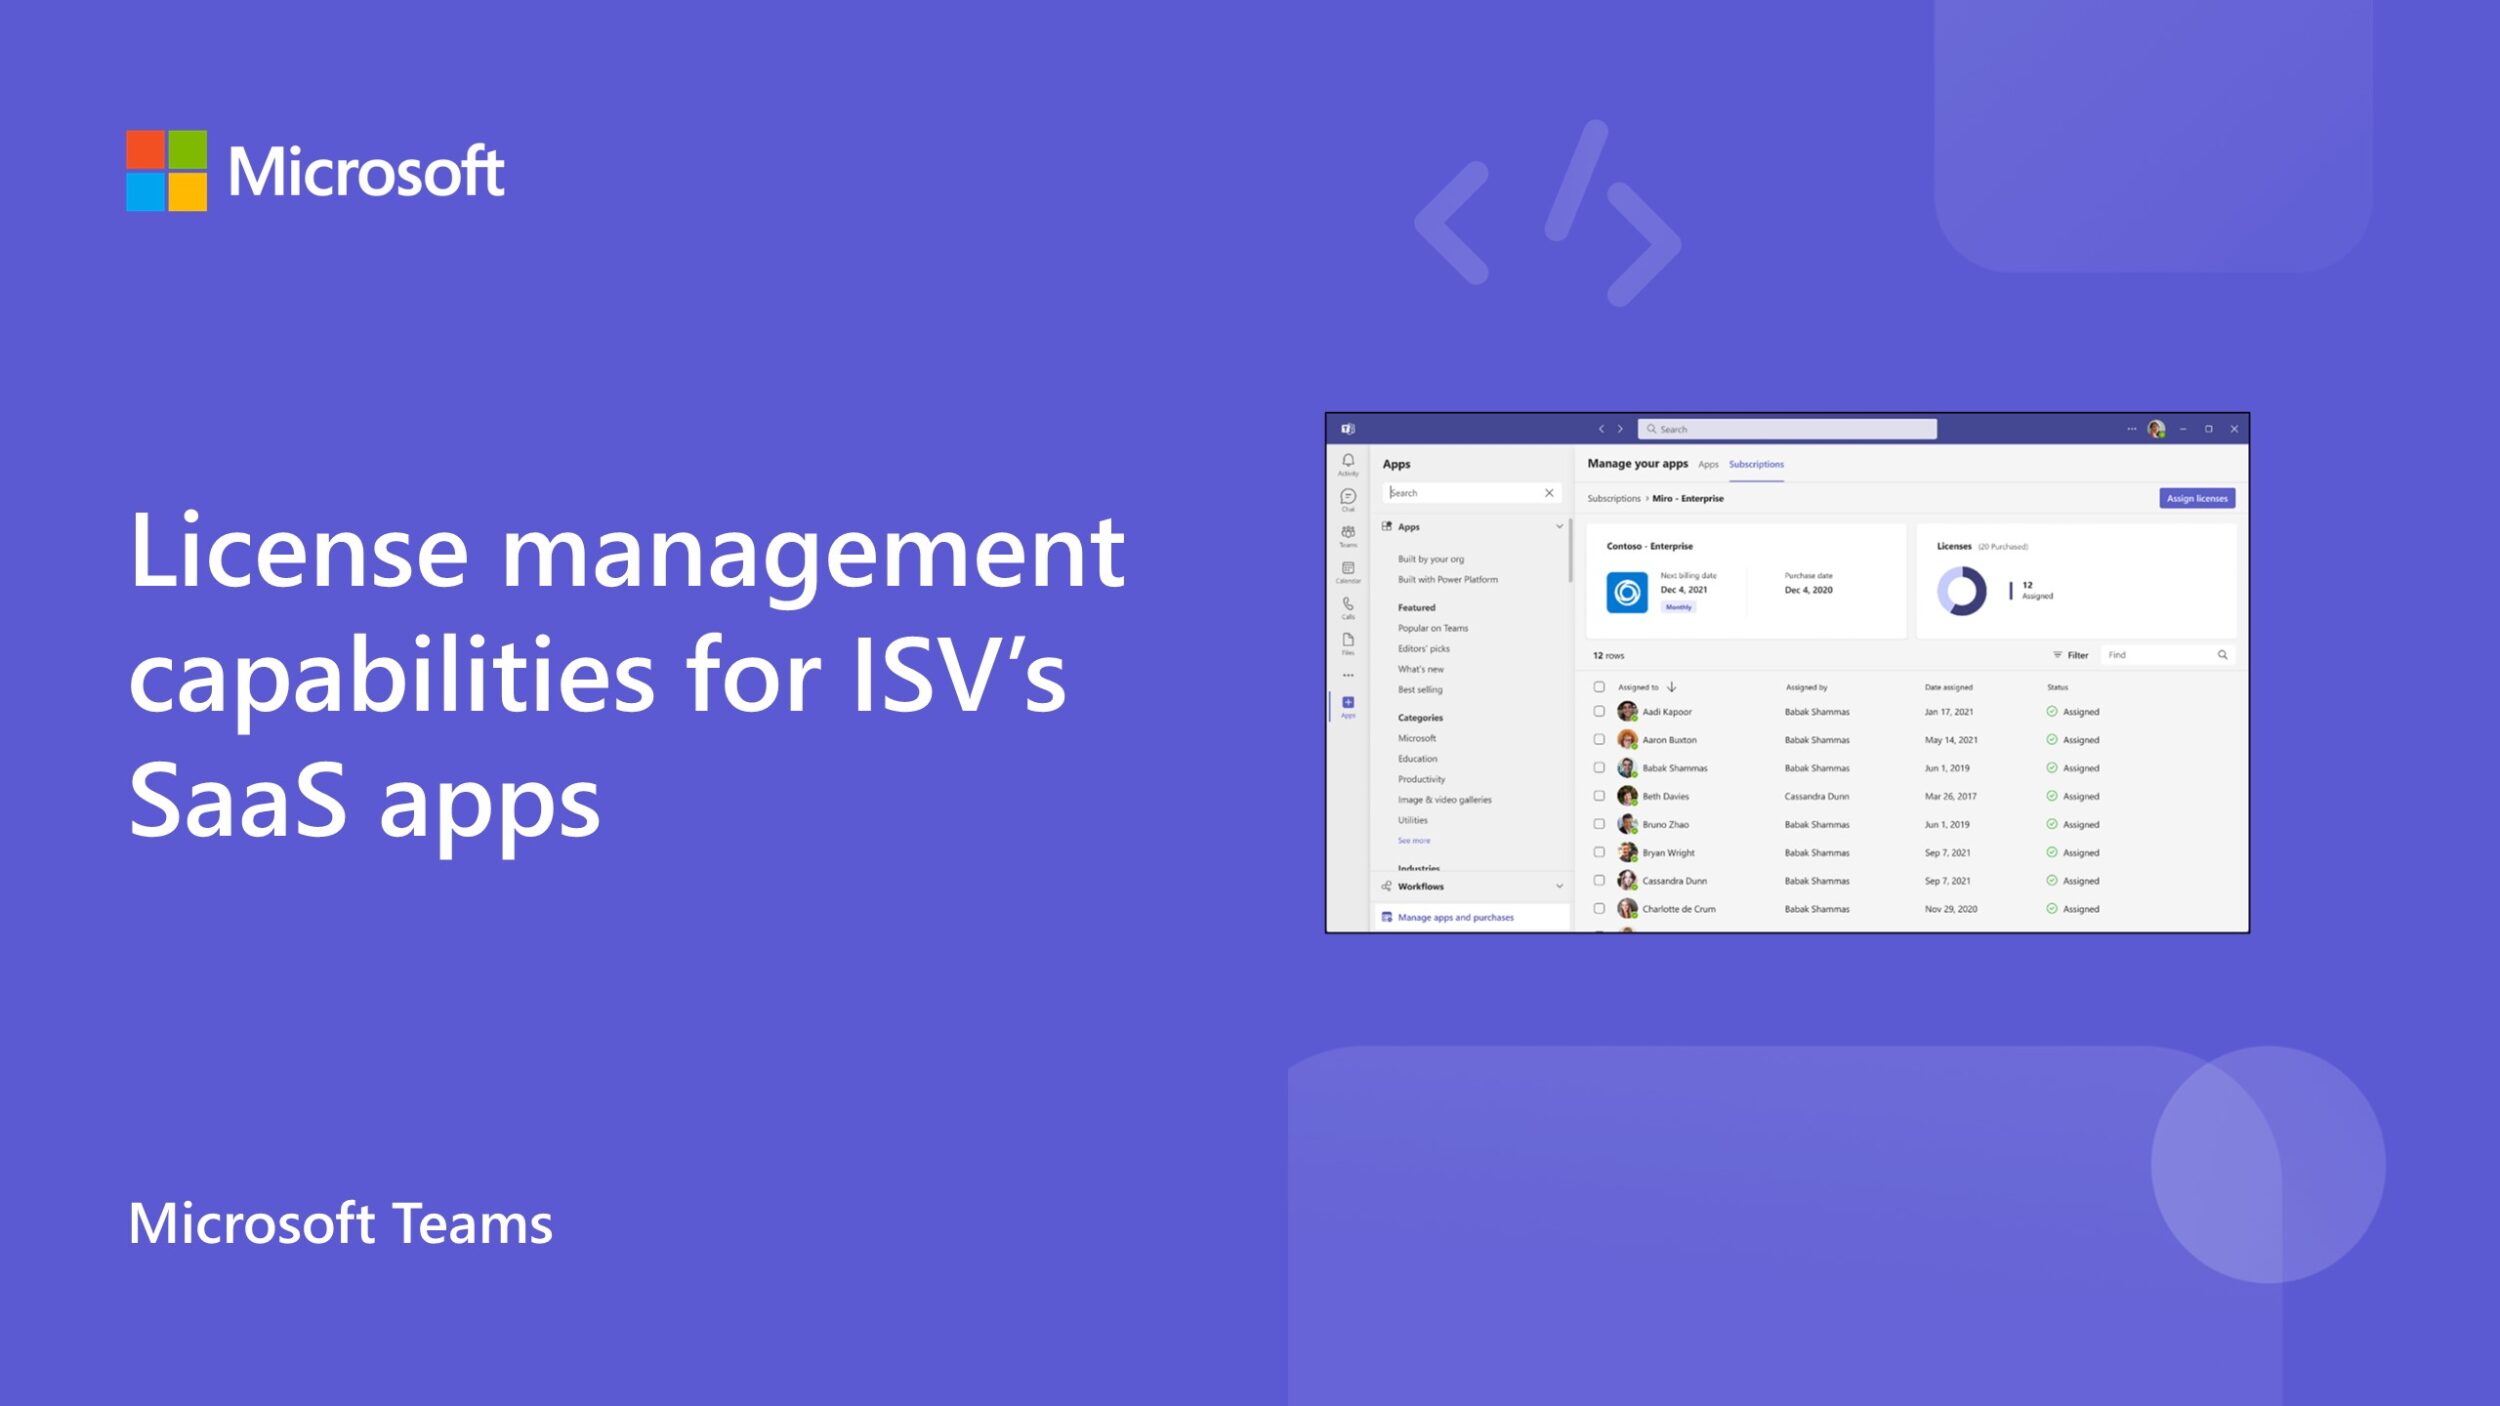 License management capabilities for Independent Software Vendors’ (ISV) SaaS apps in Microsoft Teams 